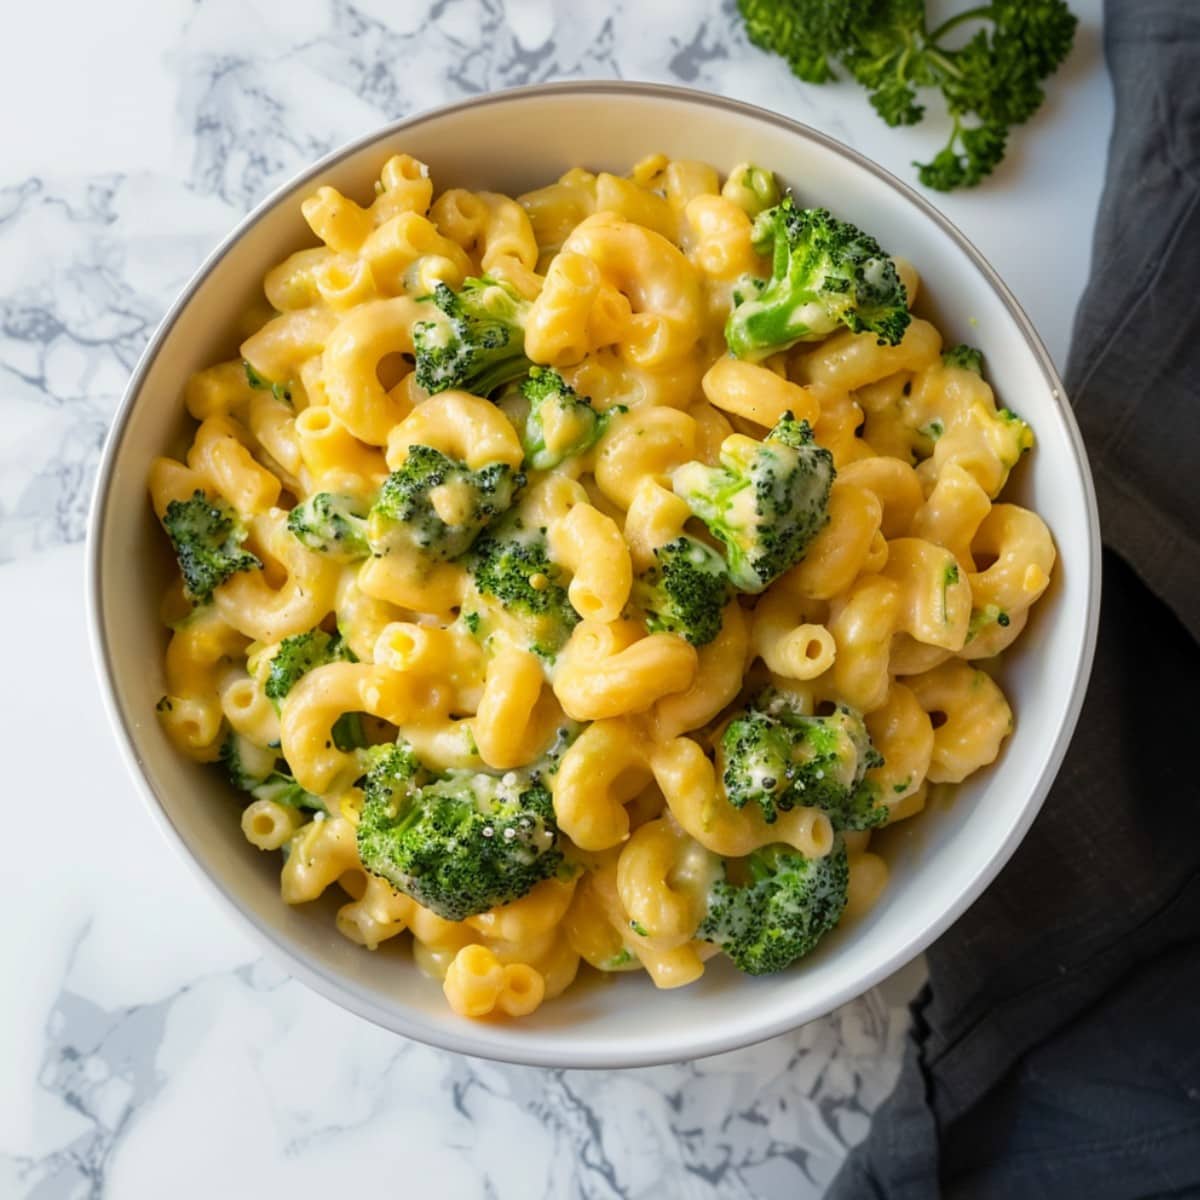 Homemade broccoli mac and cheese, featuring gooey melted cheddar enveloping perfectly cooked macaroni